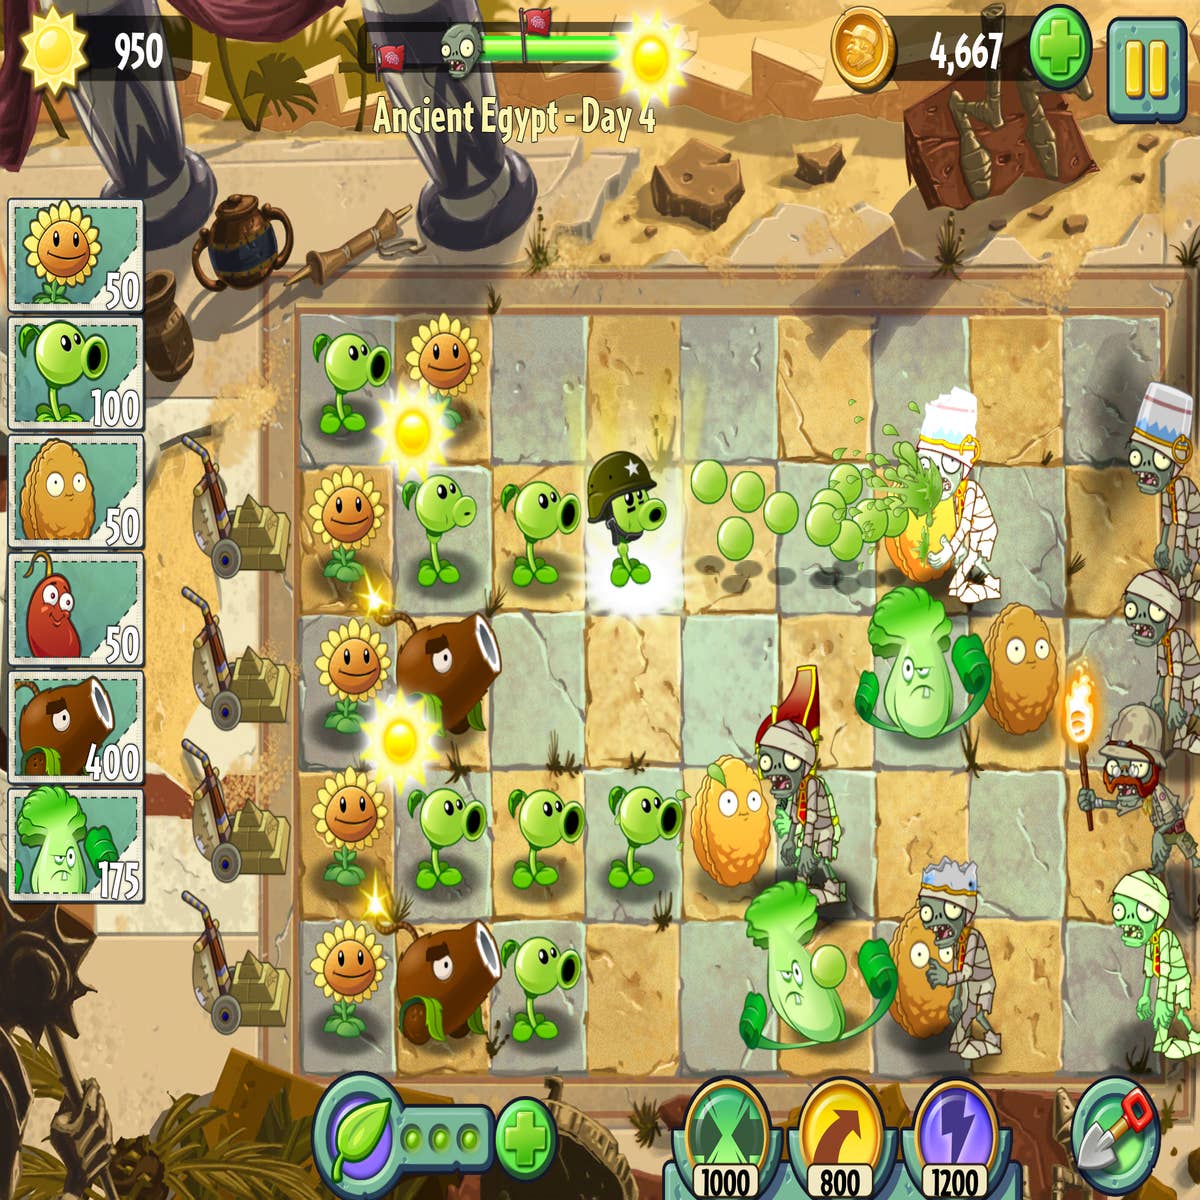 Plants Vs. Zombies Creator On Why Free To Play Games Aren't Fun